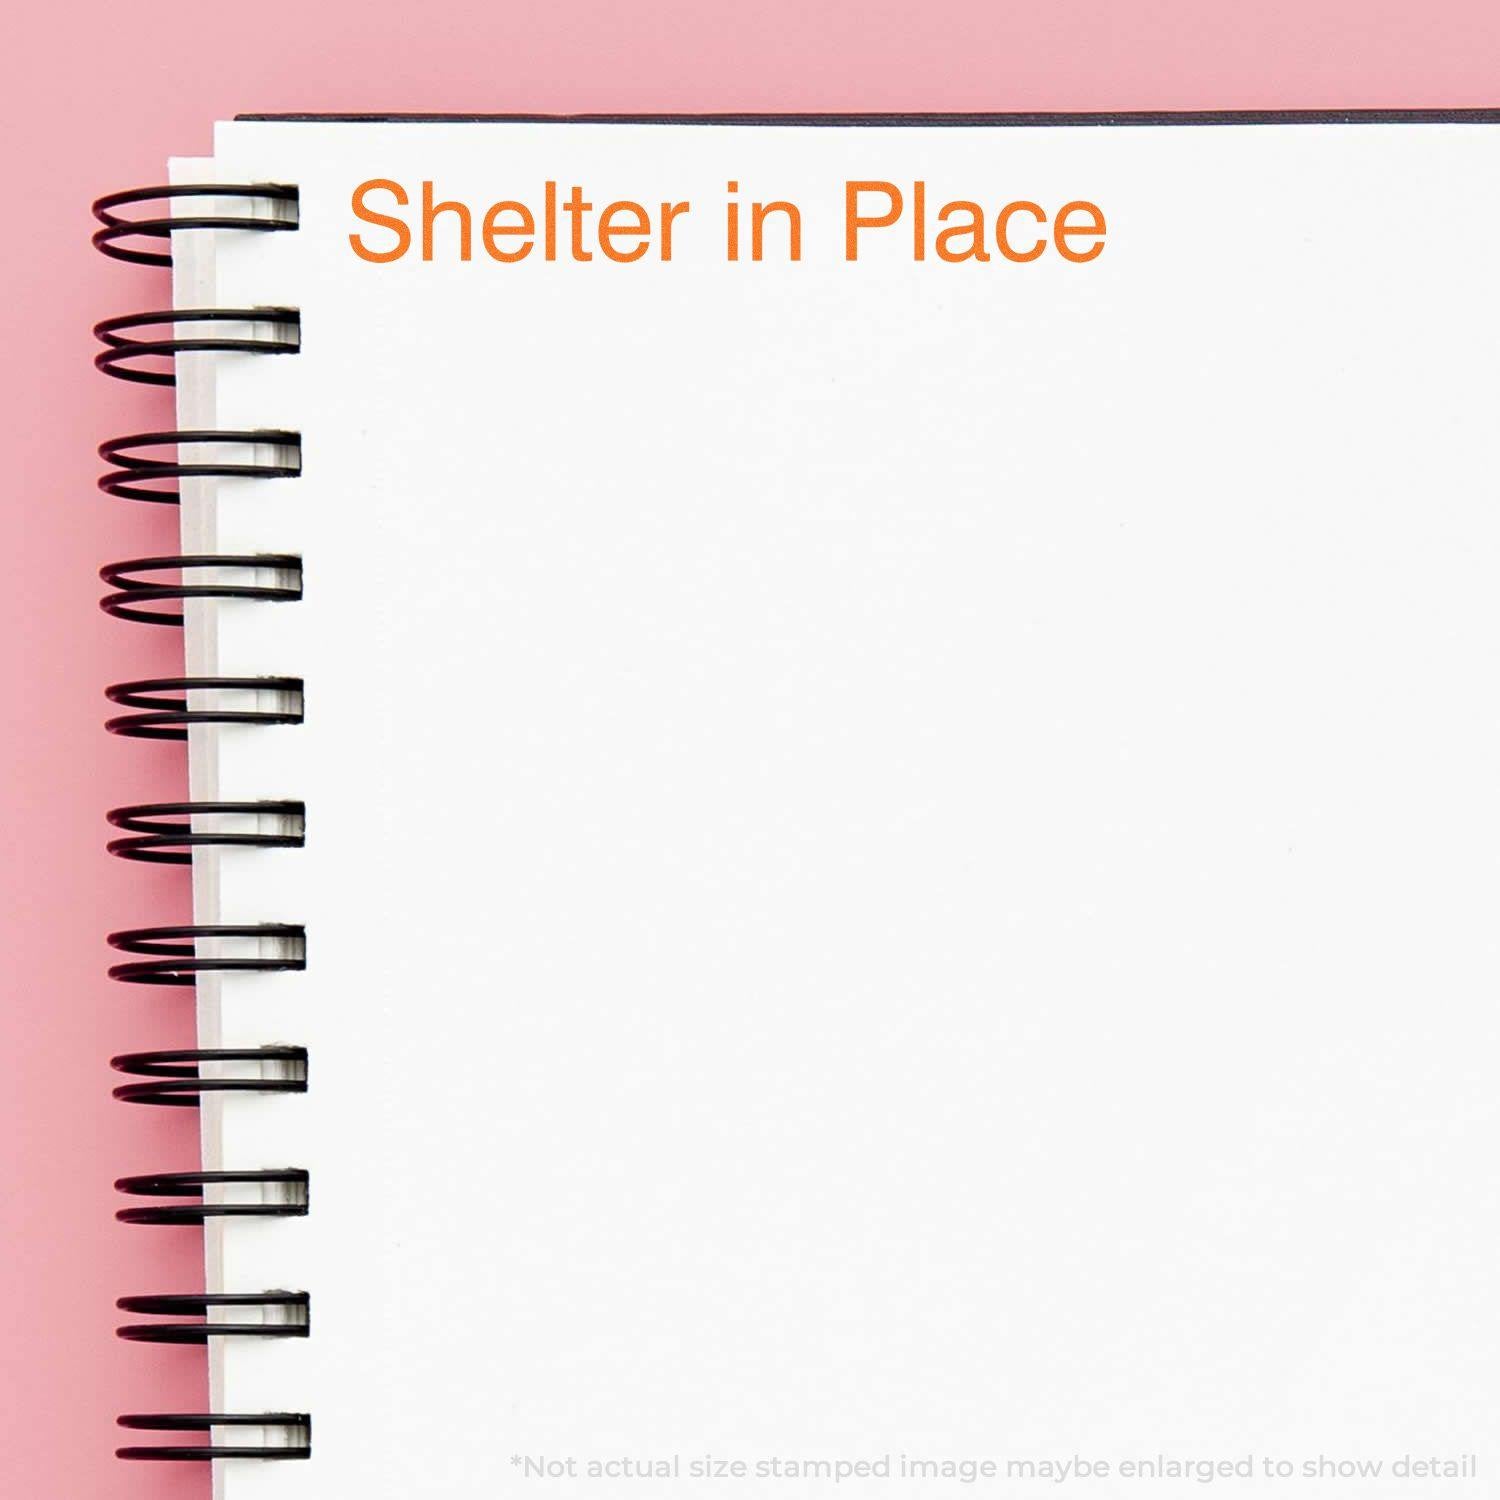 A stock office rubber stamp with a stamped image showing how the text "Shelter in Place" in a large font is displayed after stamping.